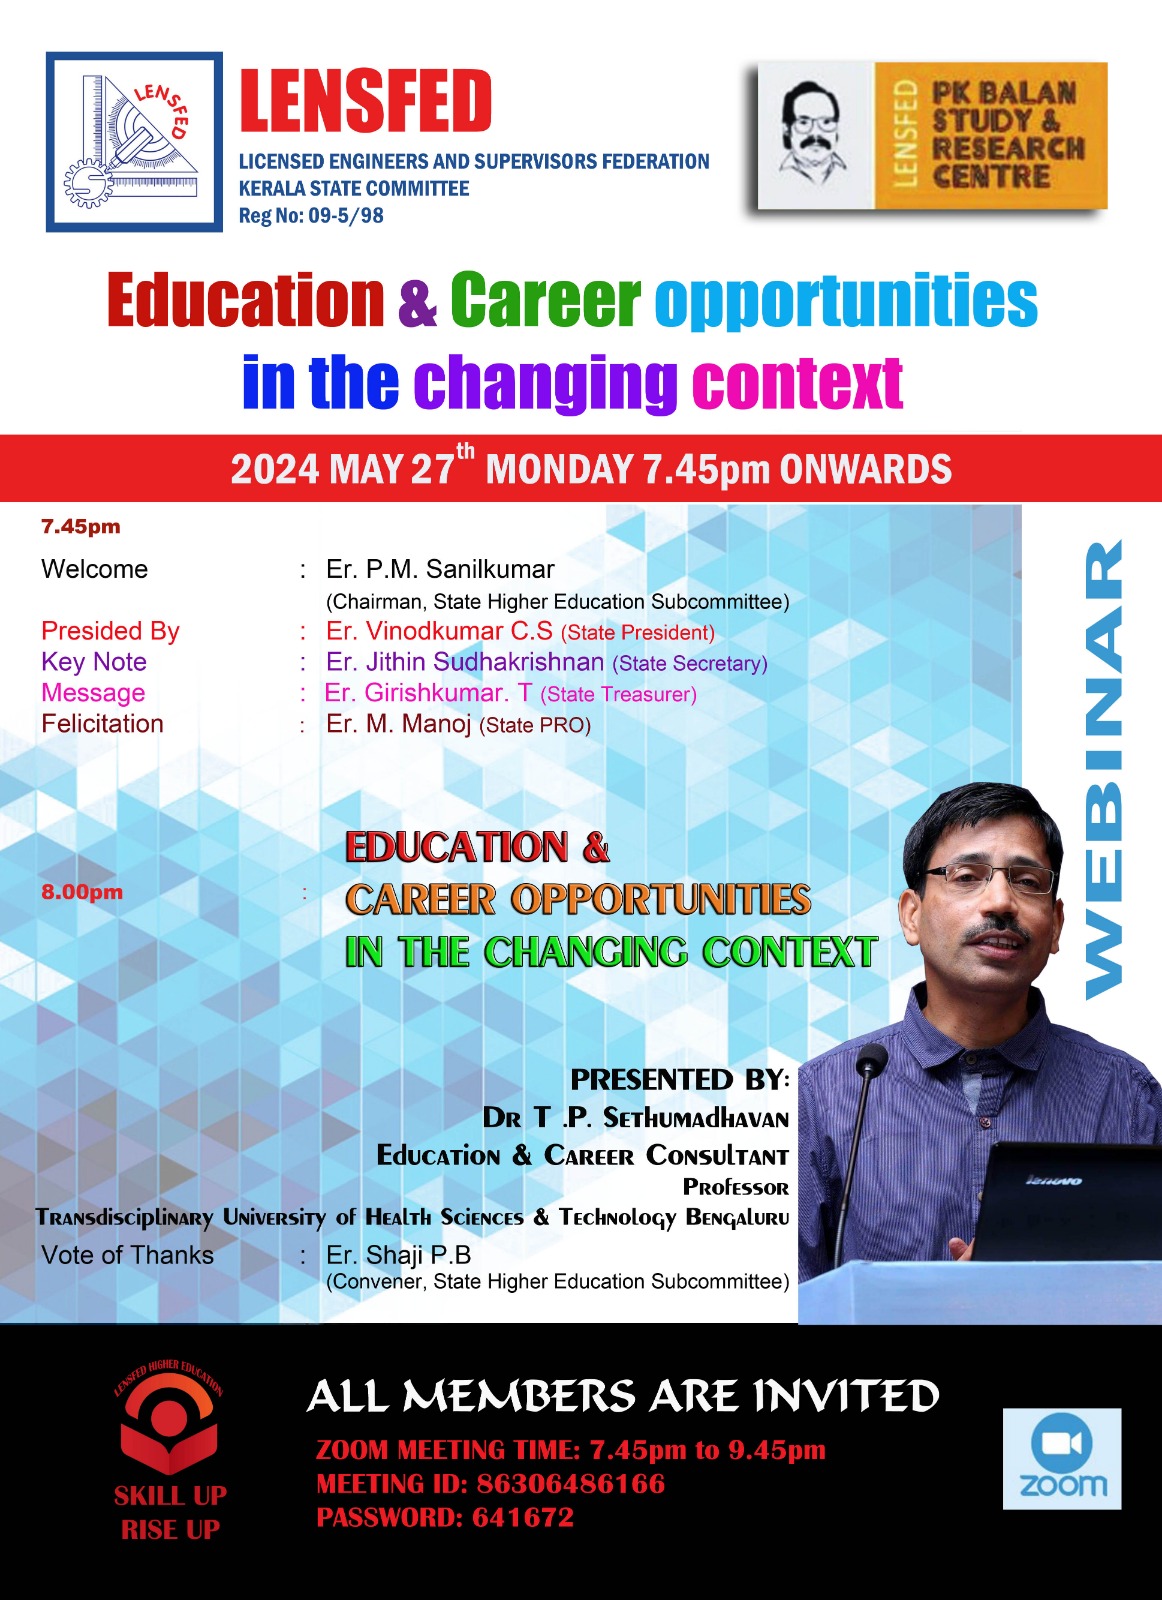 LENSFED WEBINAR ON EDUCATION & CAREER OPPORTUNITIES IN THE CHANGING CONTEXT